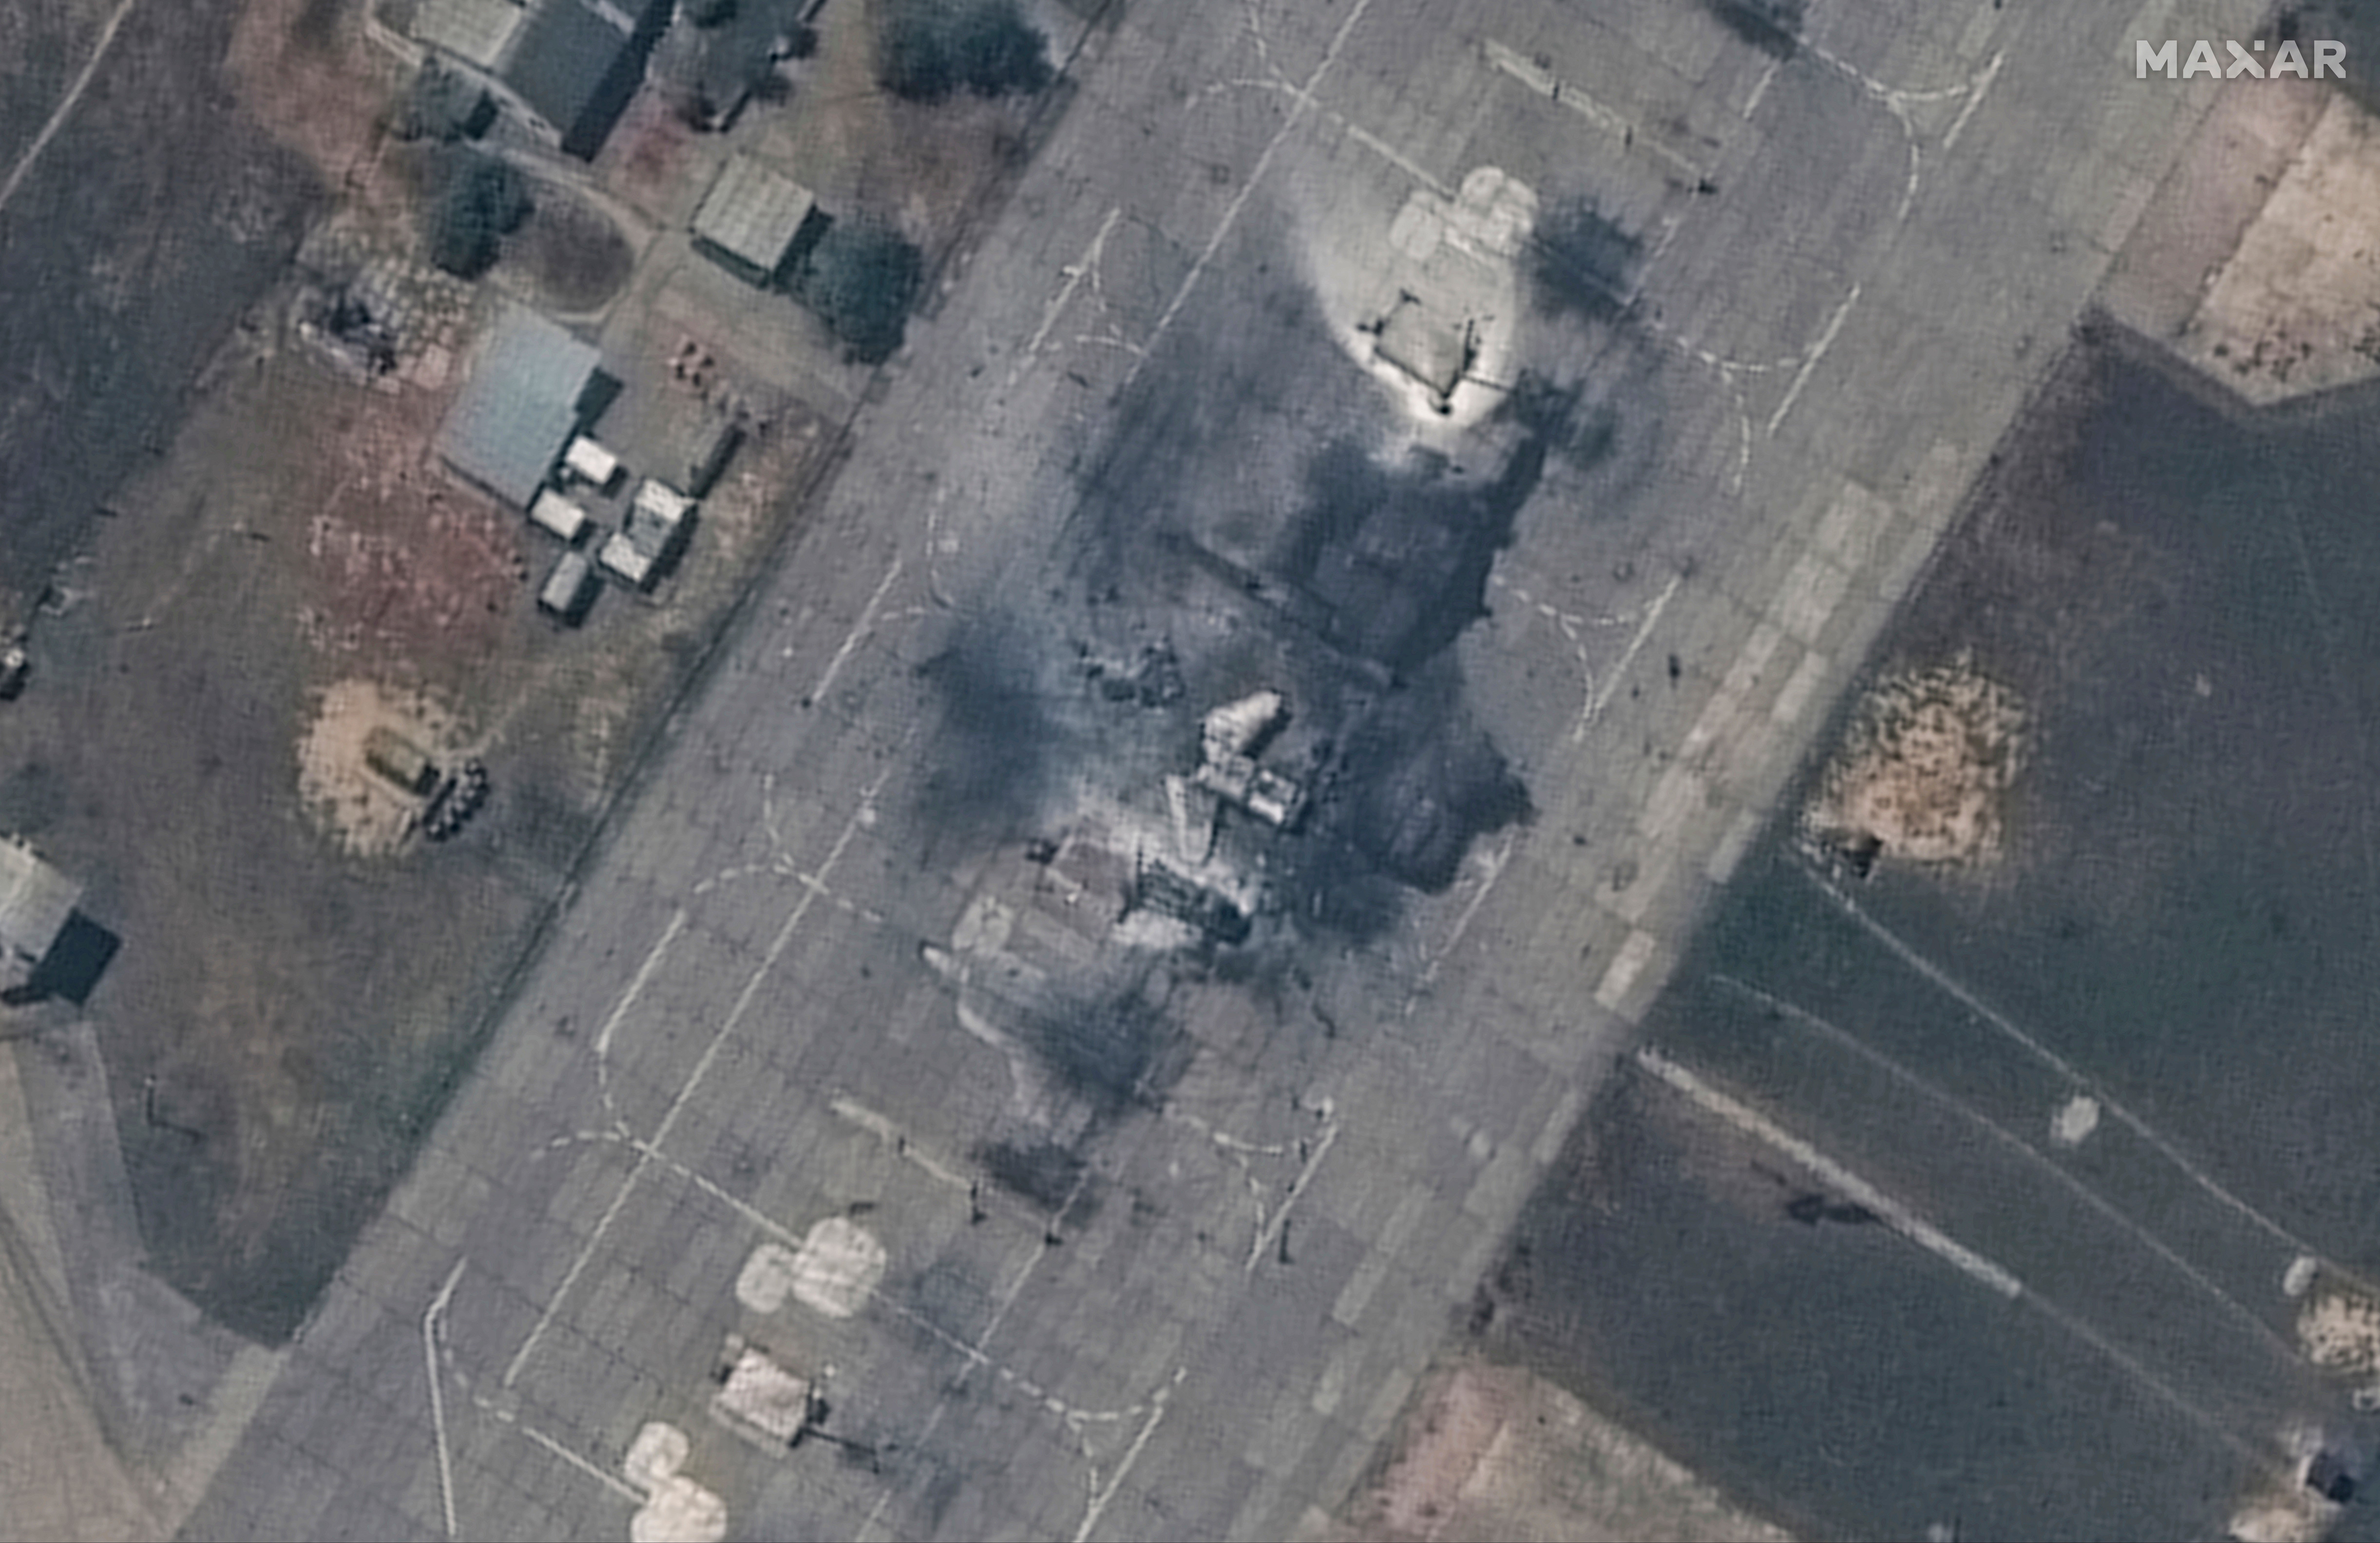 This image released by Maxar Technologies shows a closer view of a destroyed MiG 31 fighter aircraft at Belbek air base, near Sevastopol, in Crimea,